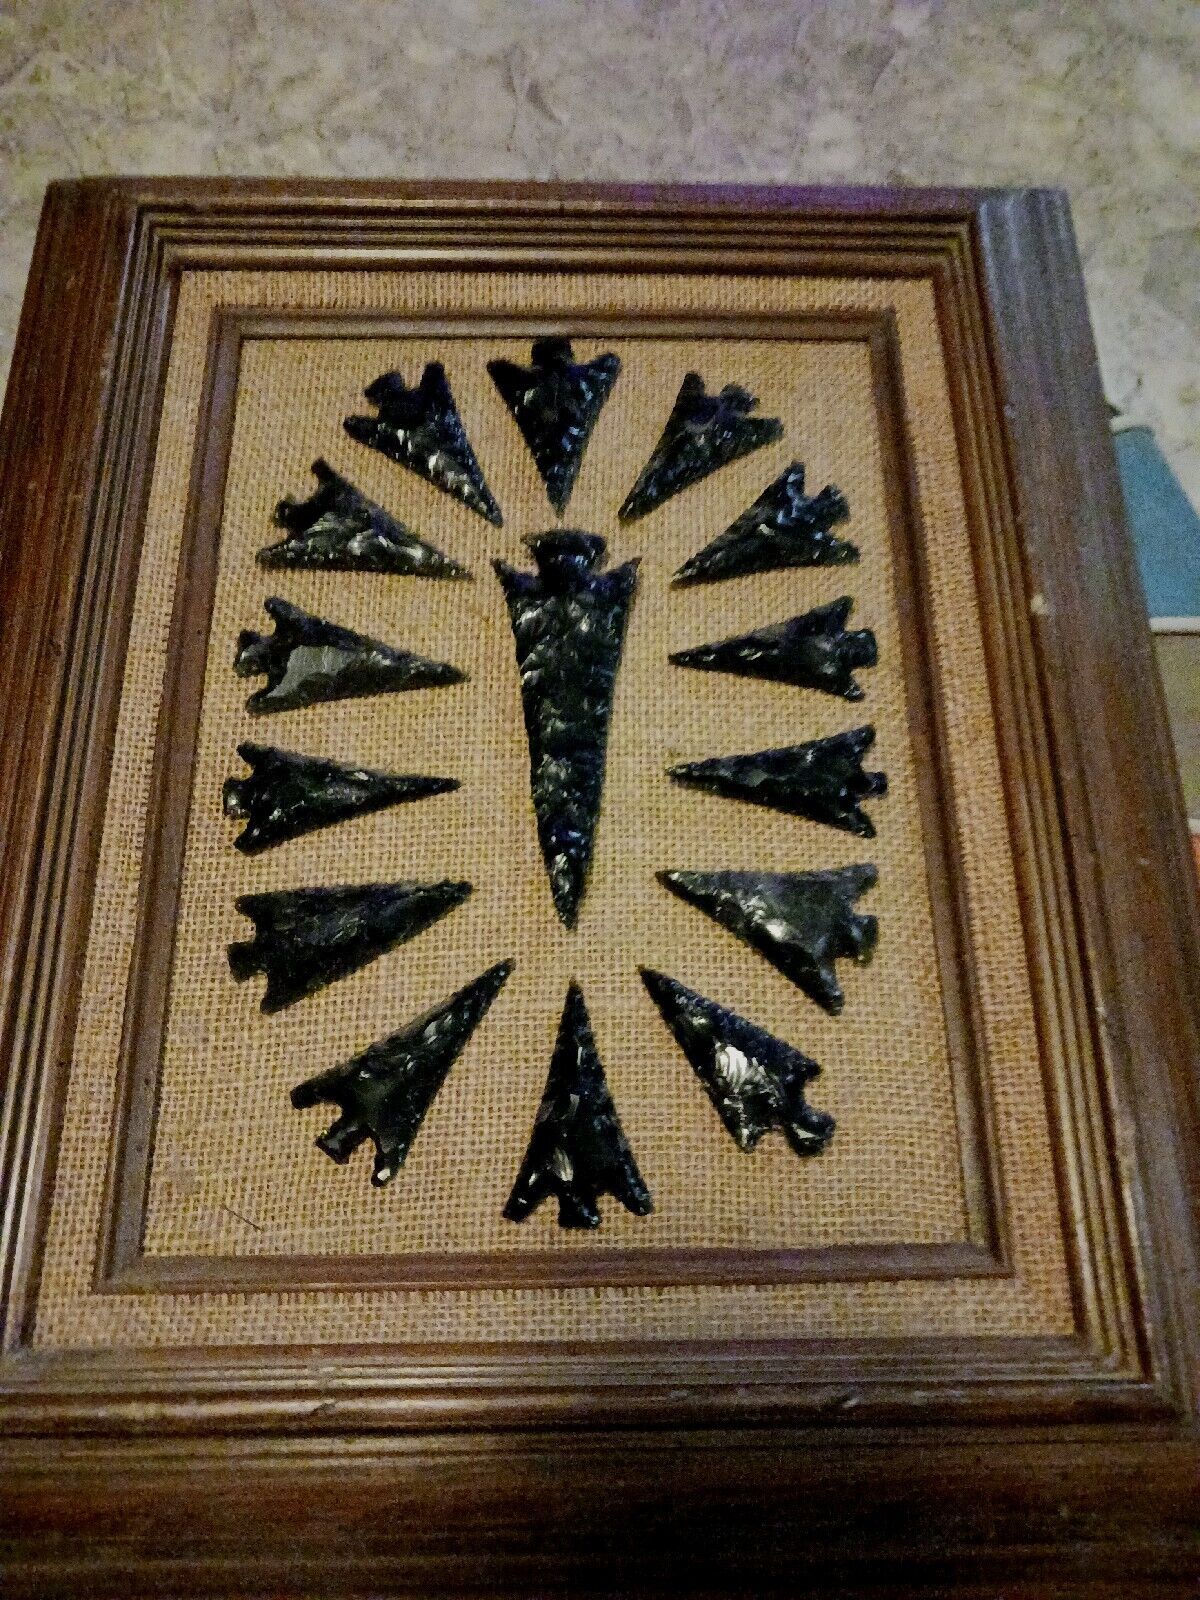 * FRAMED OBSIDIAN POINTS NOT ANCIENT BEAUTIFUL ART VERY NICE COLLECTORS ITEM *